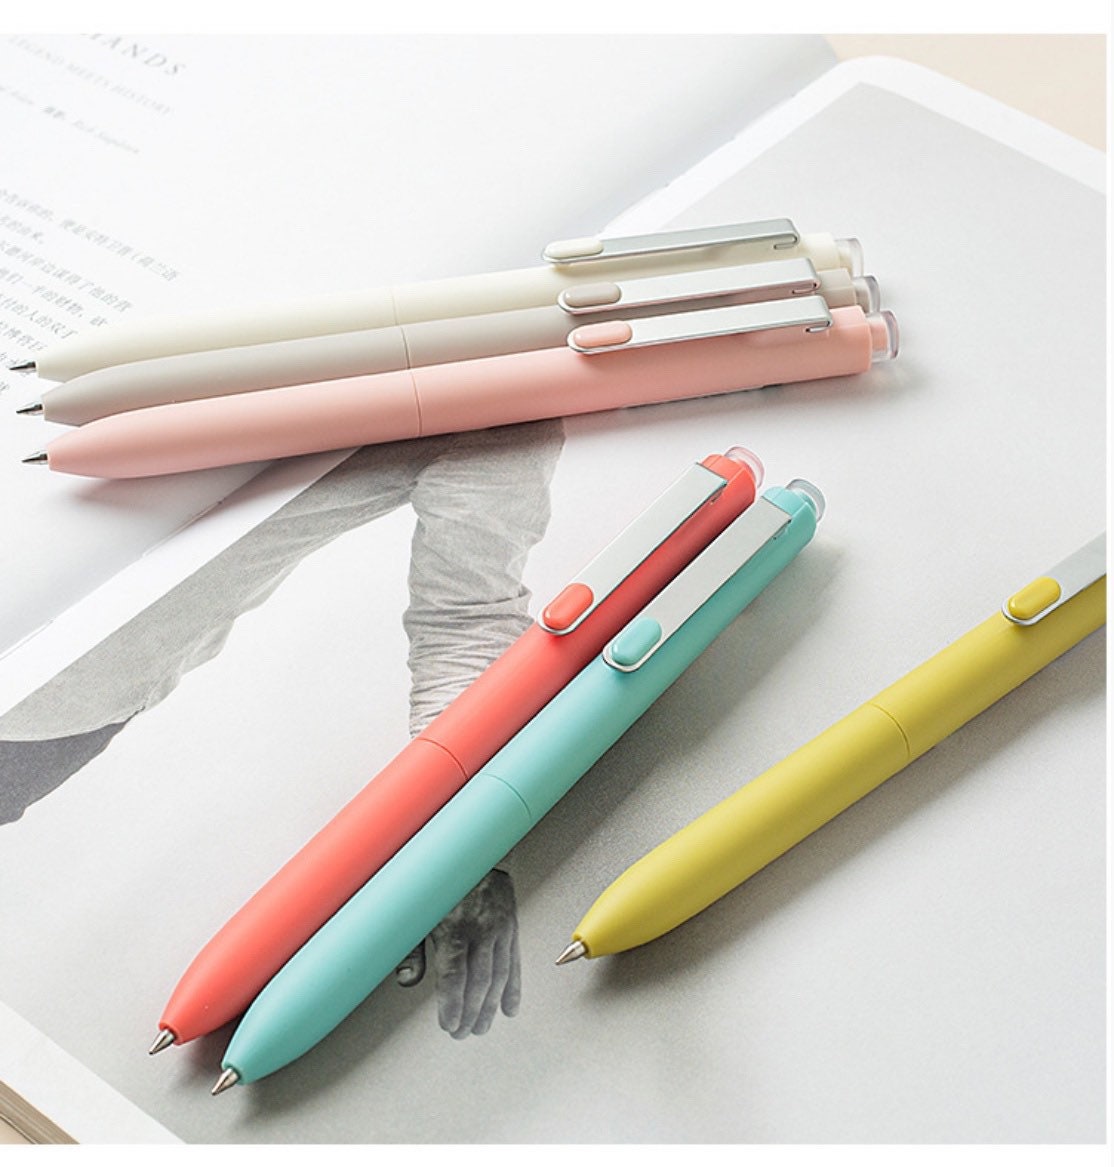 Black gel pens in macaron color with a 0.5mm point are available as writing  supplies for students' desks.